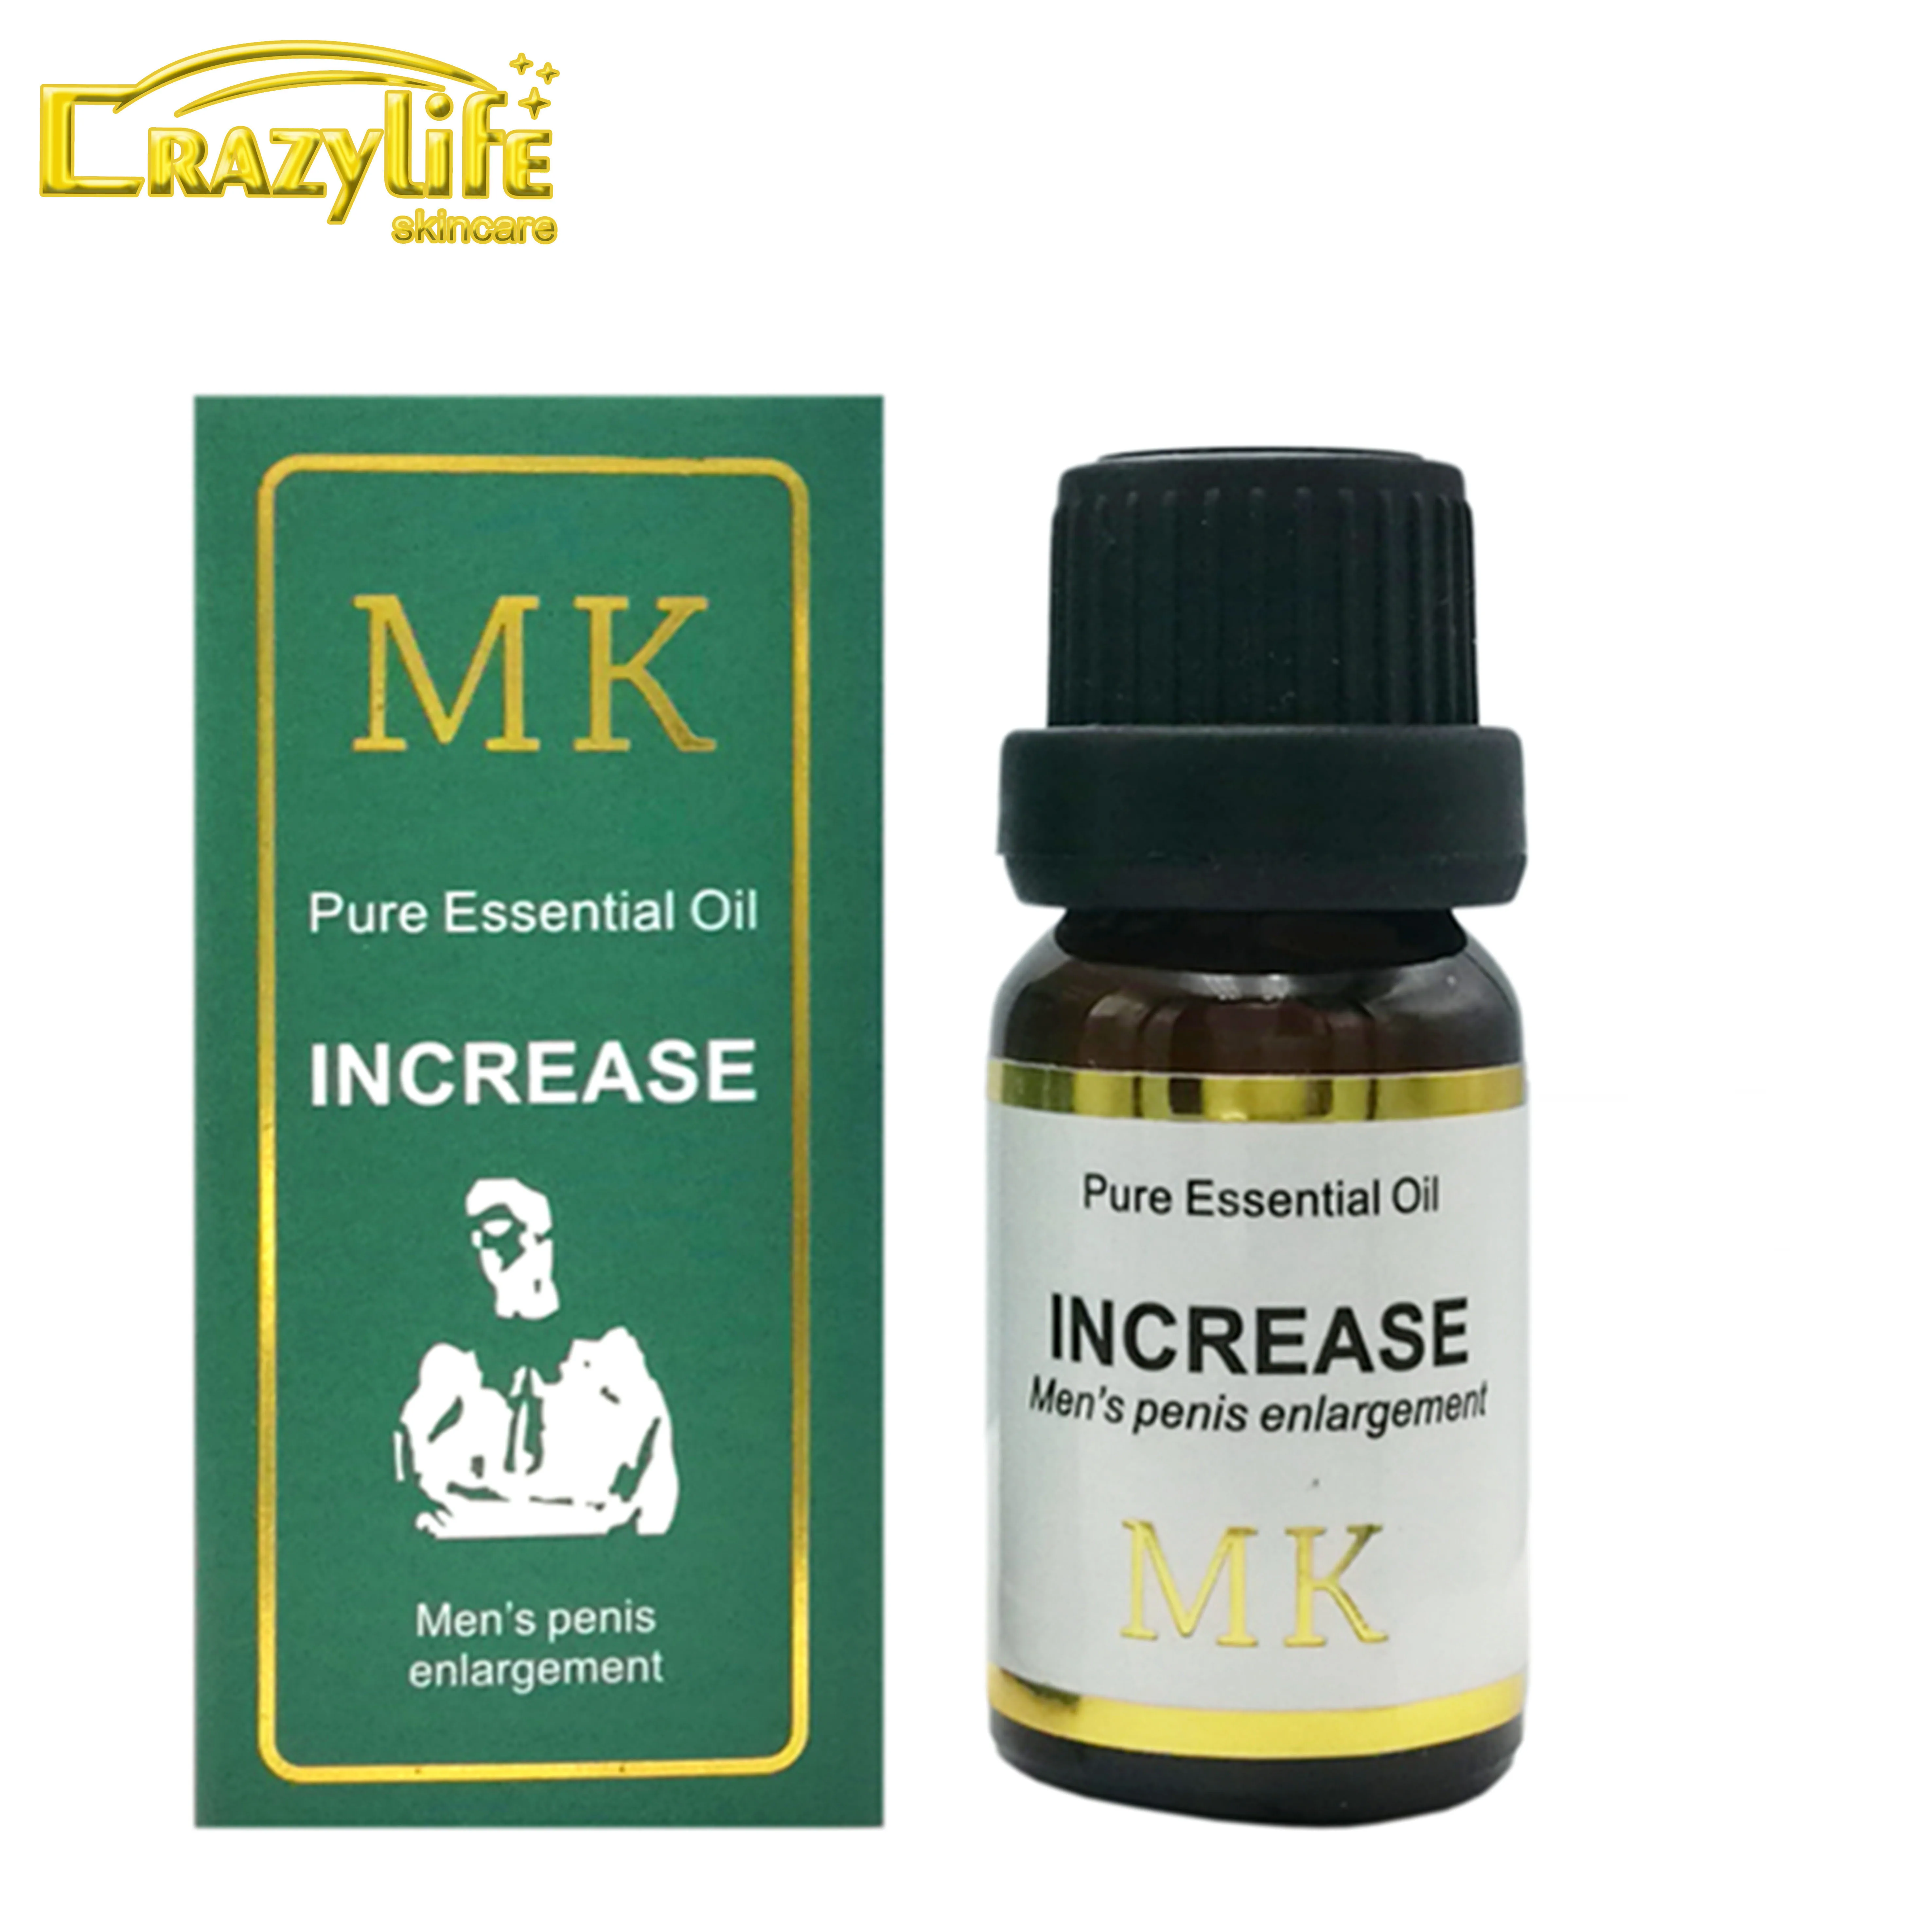 

Male Big Dick MK Essential Oil for Men To Increase Cock Growth Thickening Massage Oil 10ml Enlargement Prod